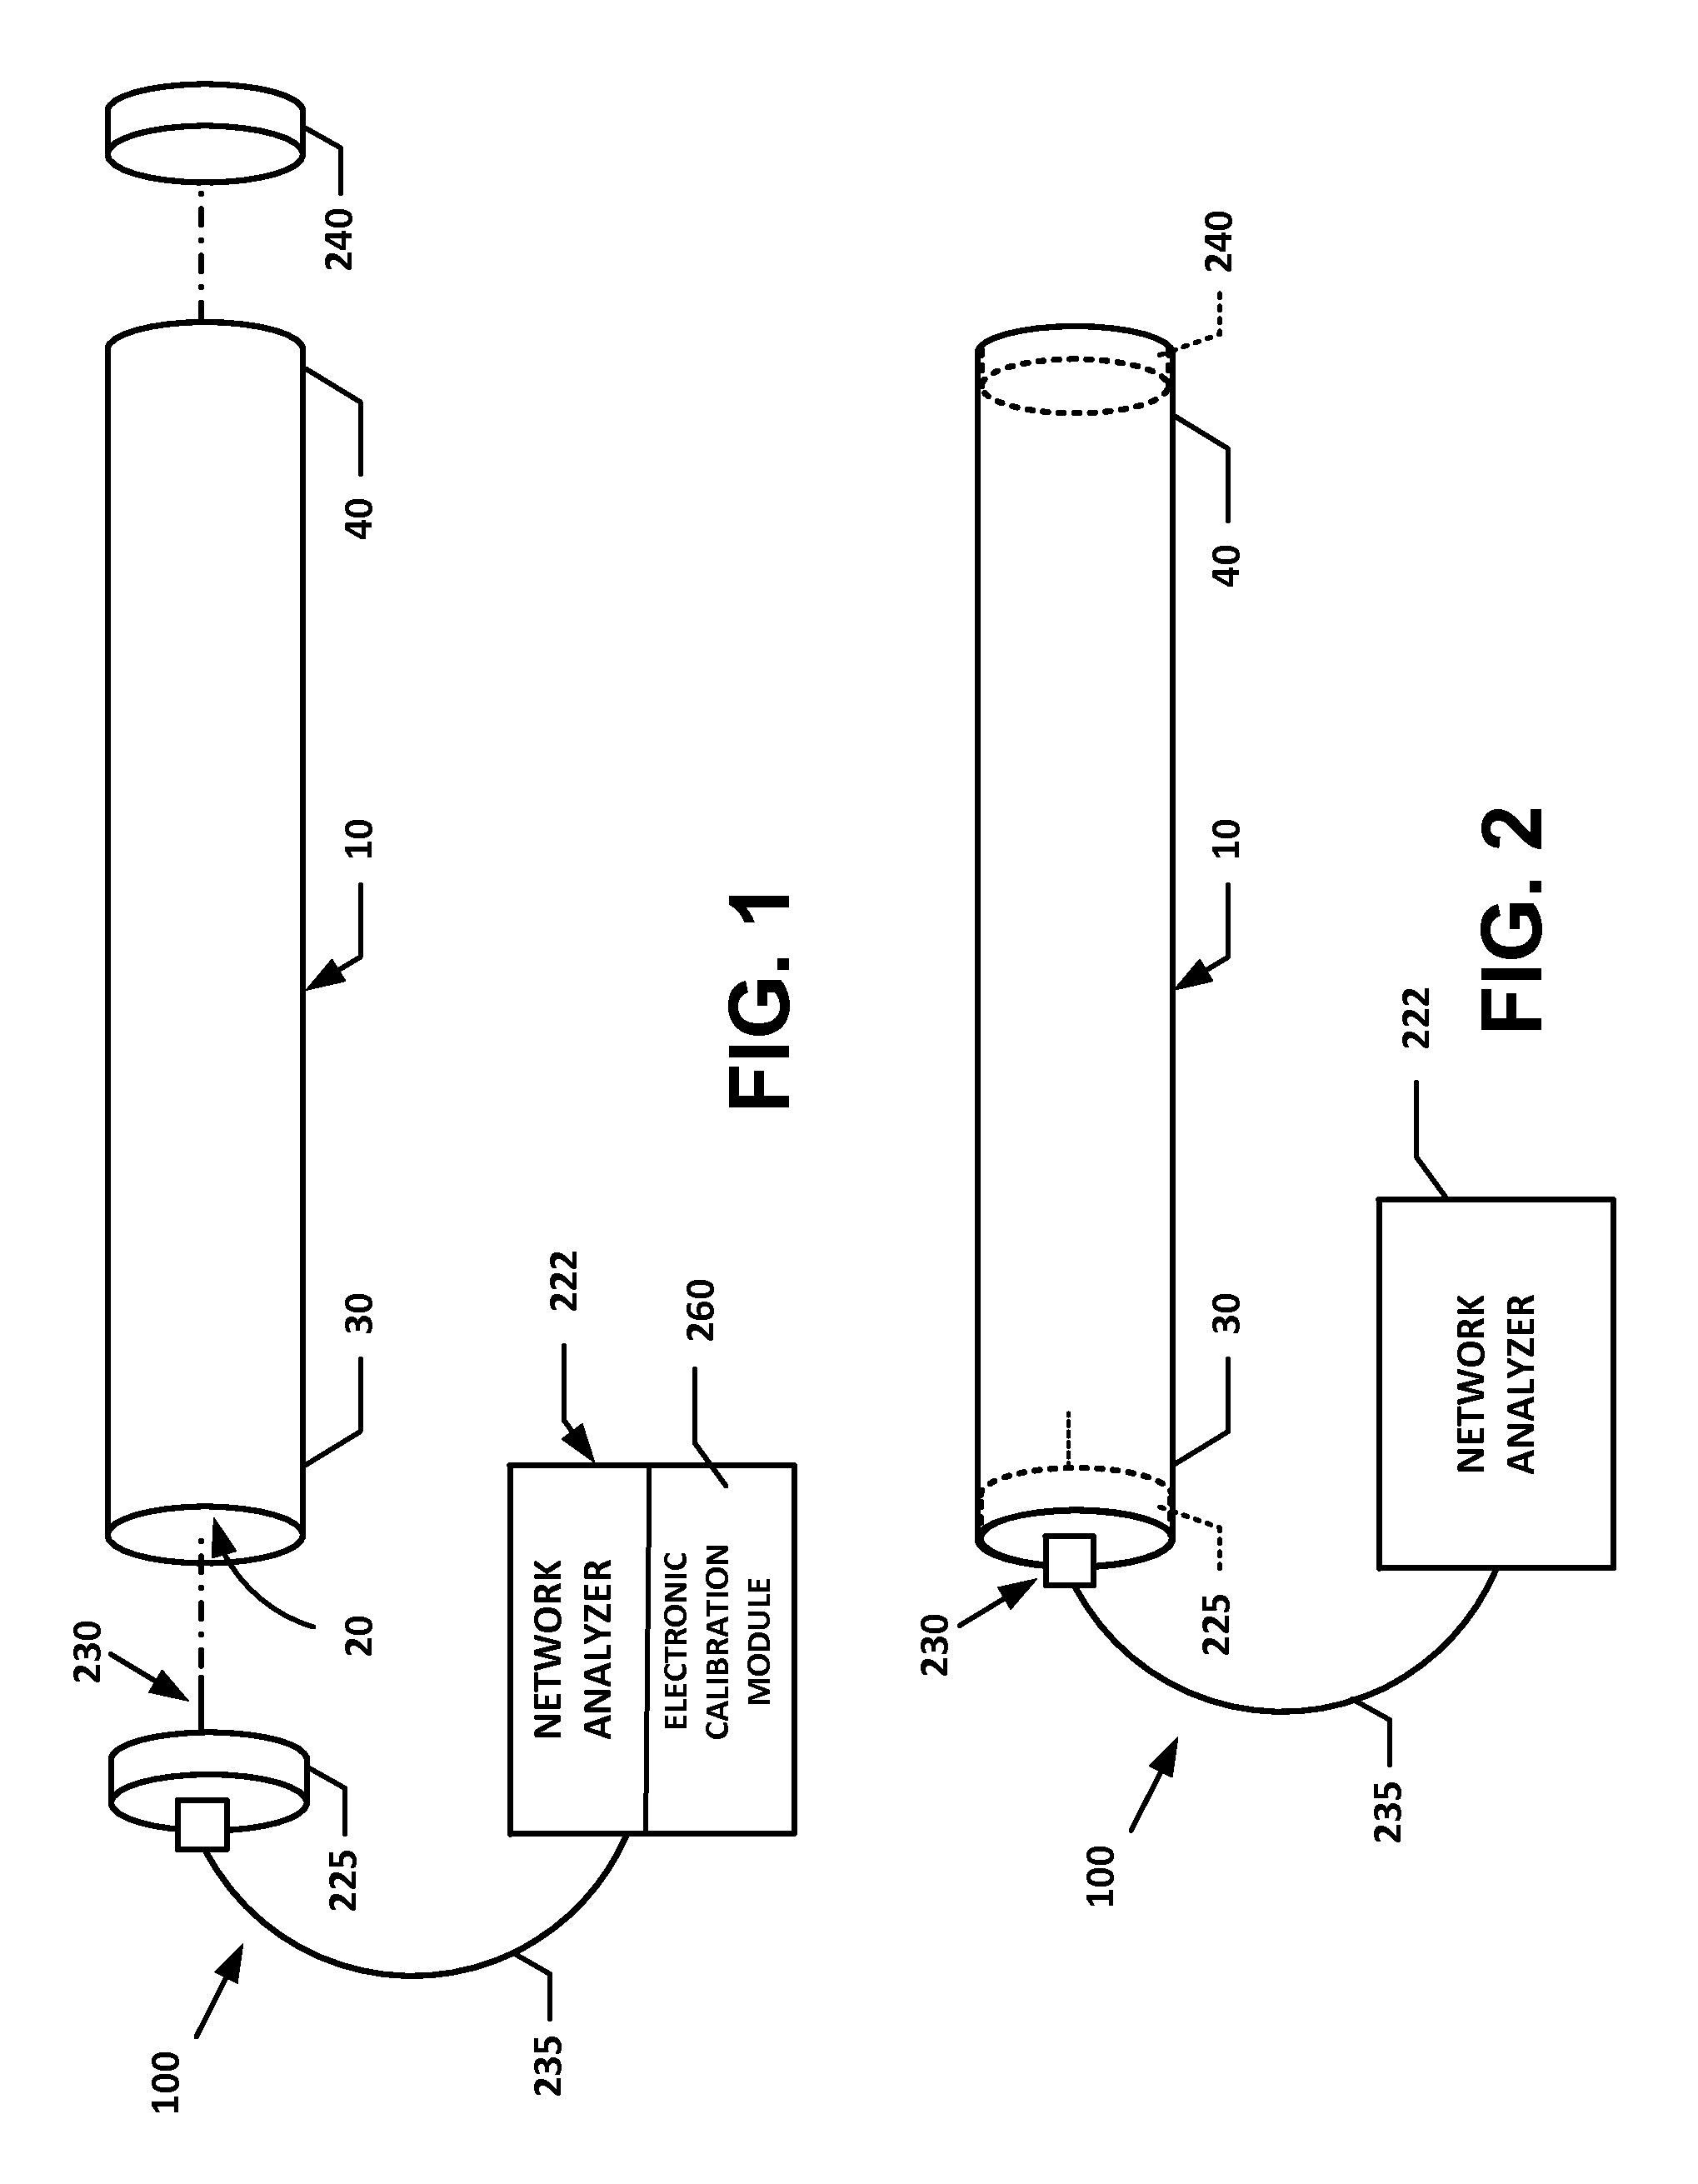 System and method for conducting electromagnetic resonant cavity inspection of gun barrels